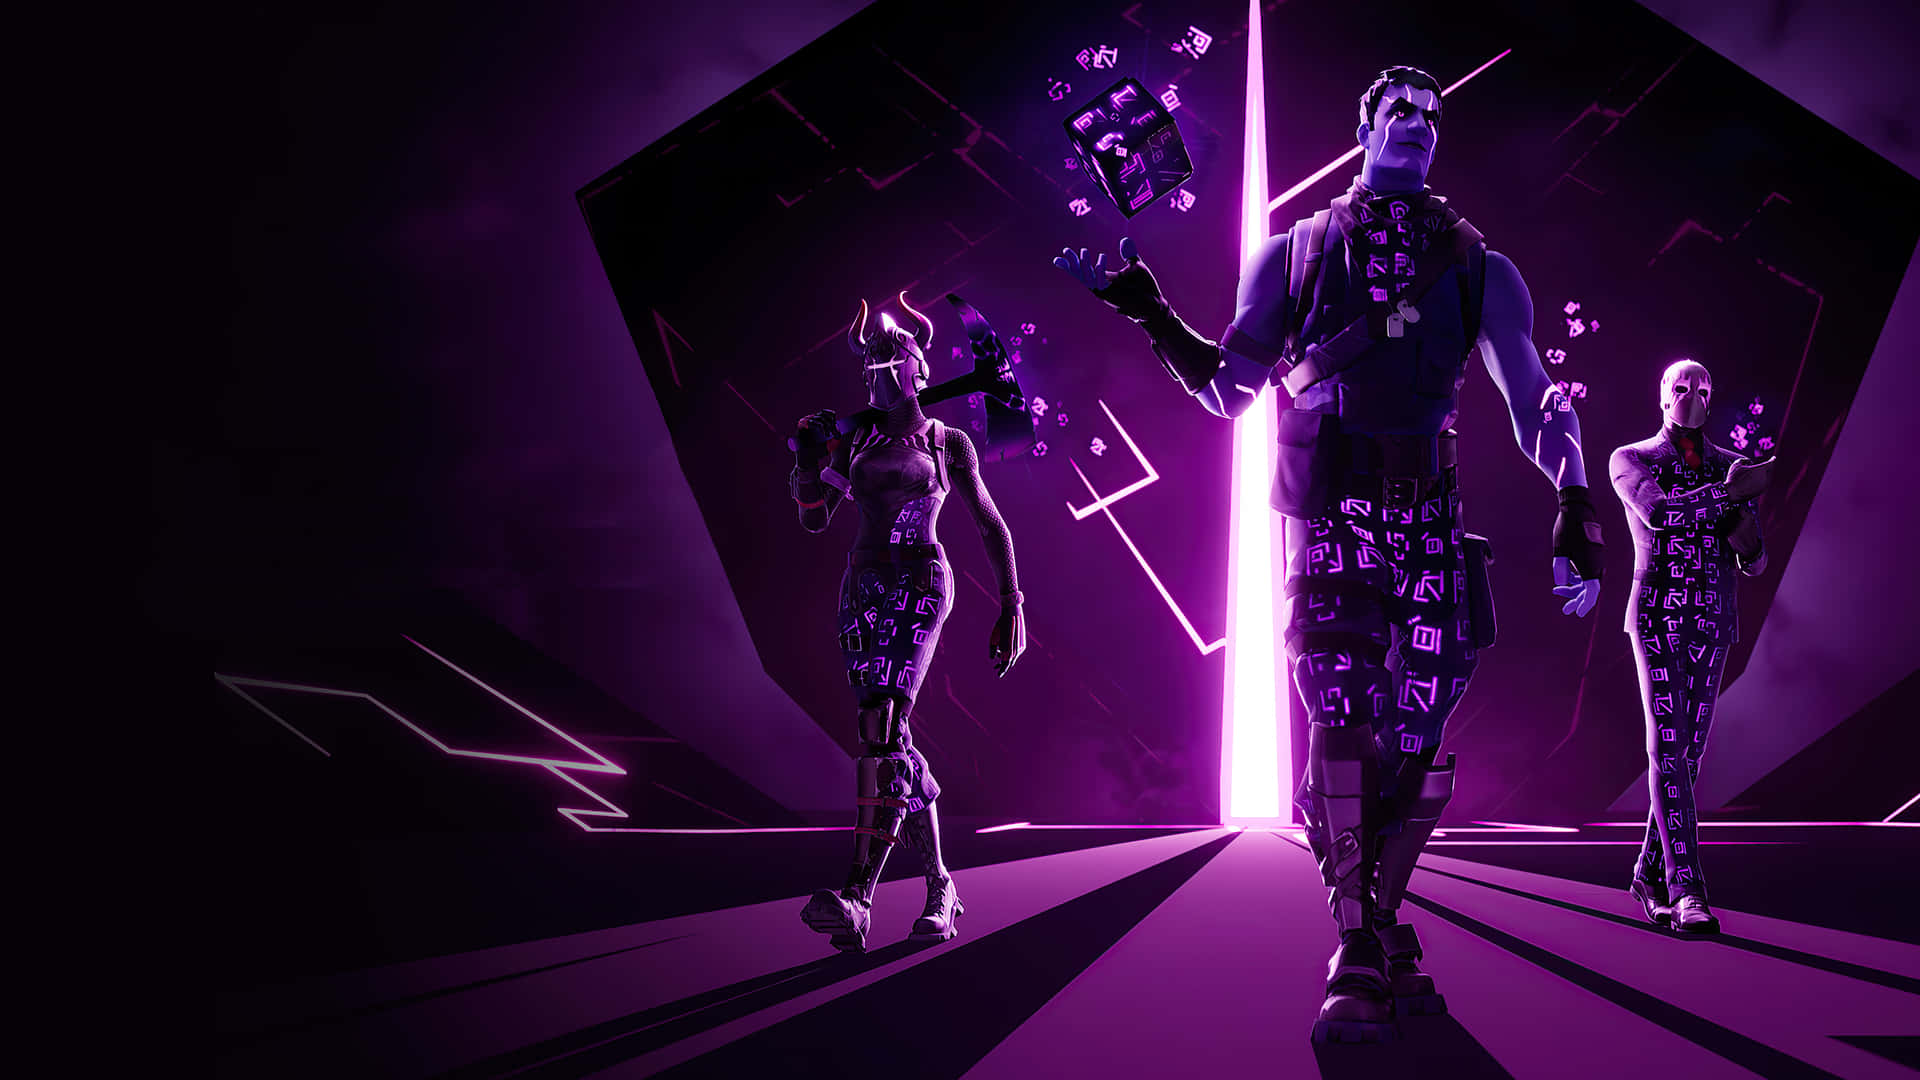 Brighten up your desktop with the vibrant colors of Fortnite Purple! Wallpaper